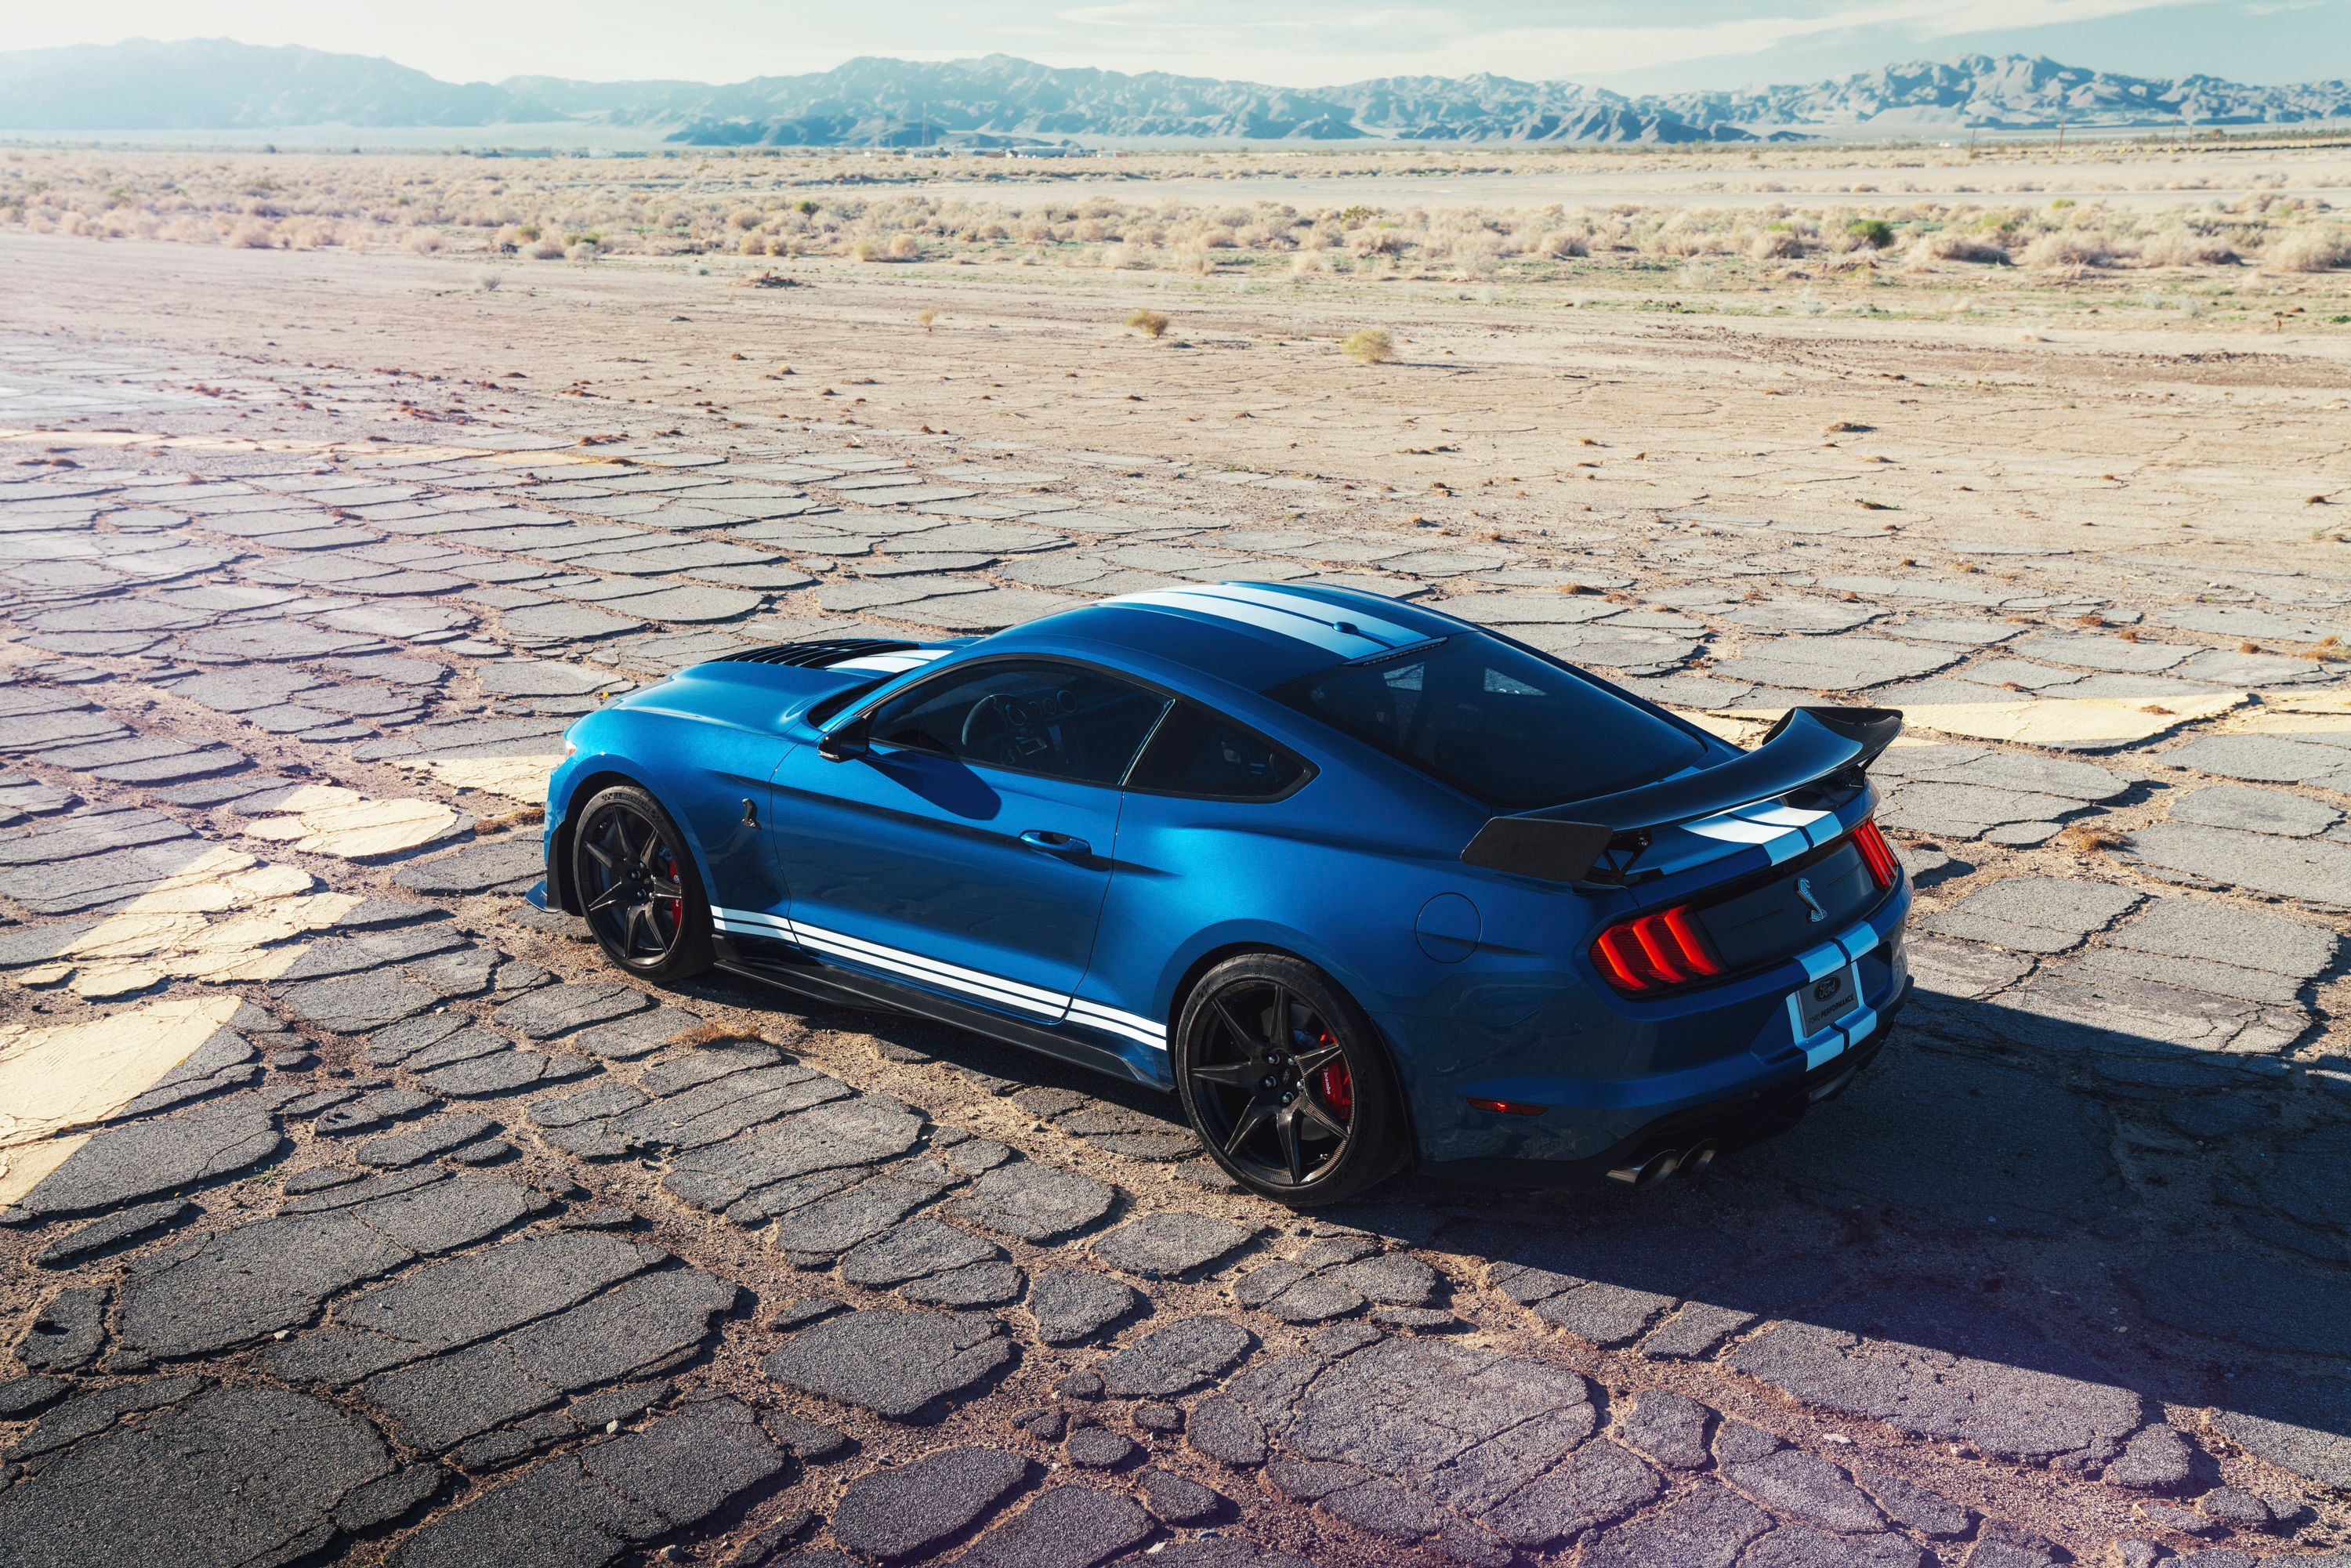 2020 The 2020 Shelby Mustang GT500 Will Land In Australia, but the Price Will Make Your Ass Hurt